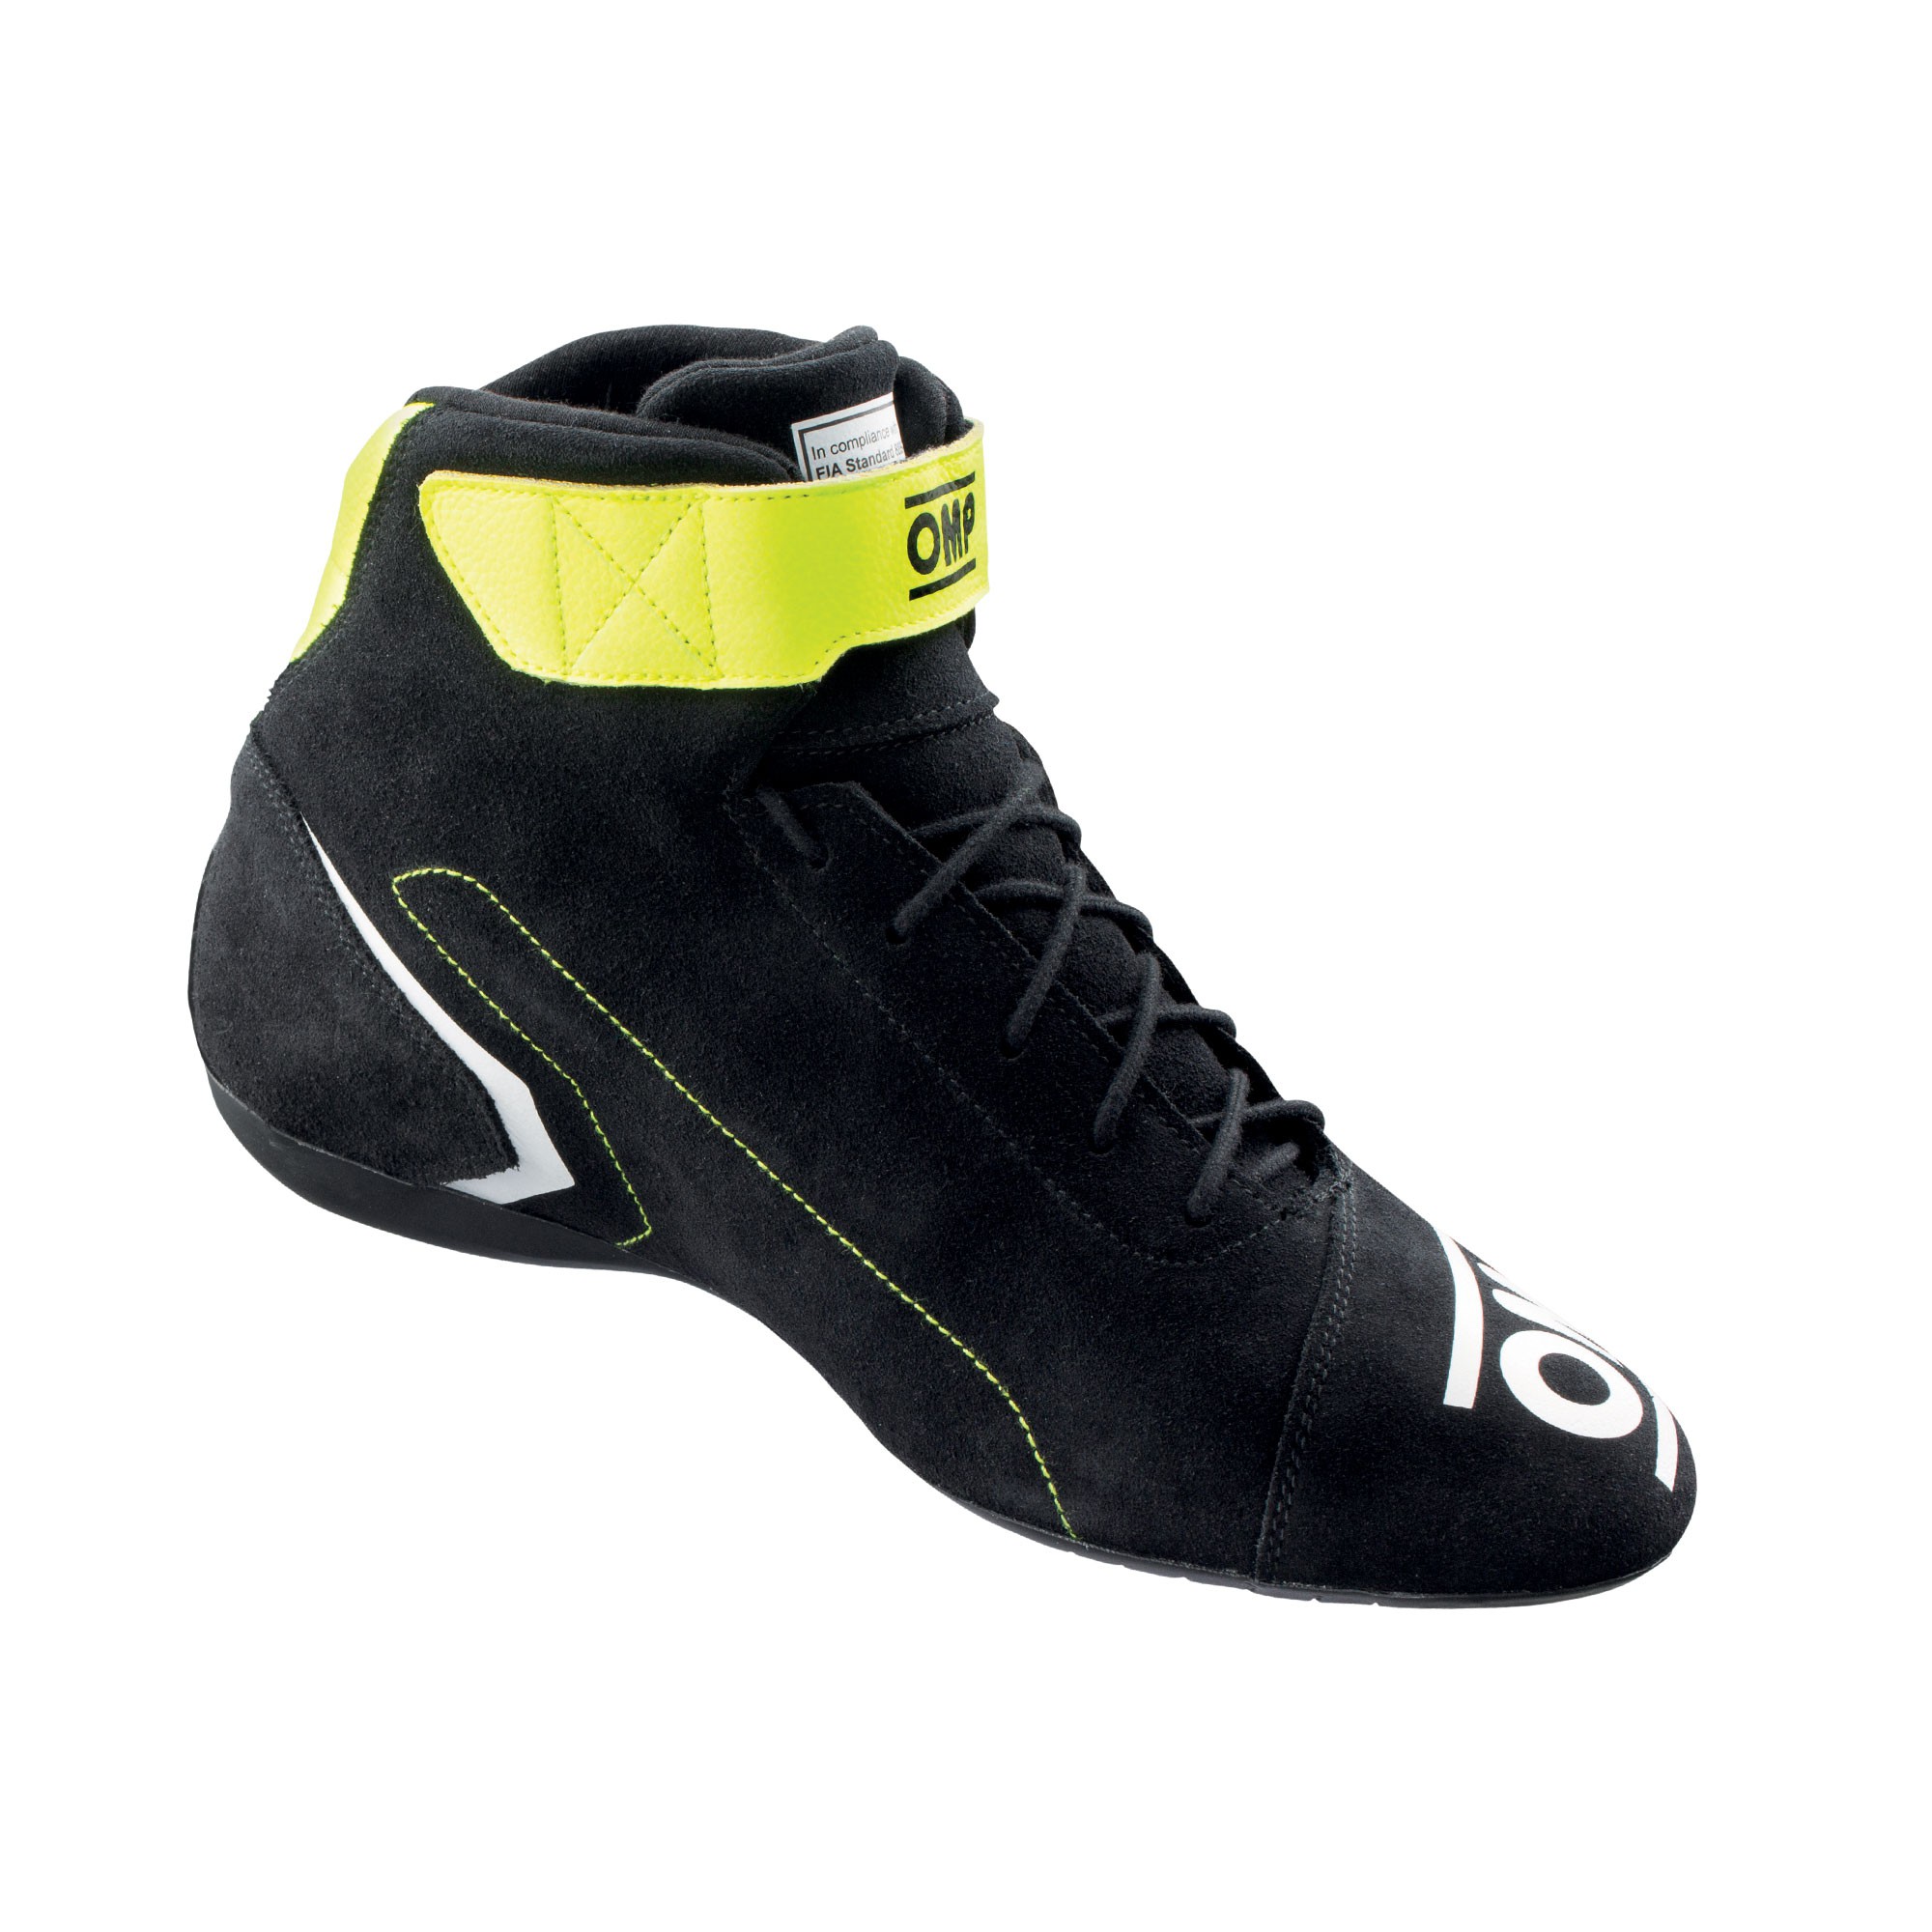 FIRST SHOES my2021 ANTHRACITE/FLUO YELLOW TG. 37 FIA 8856-2018